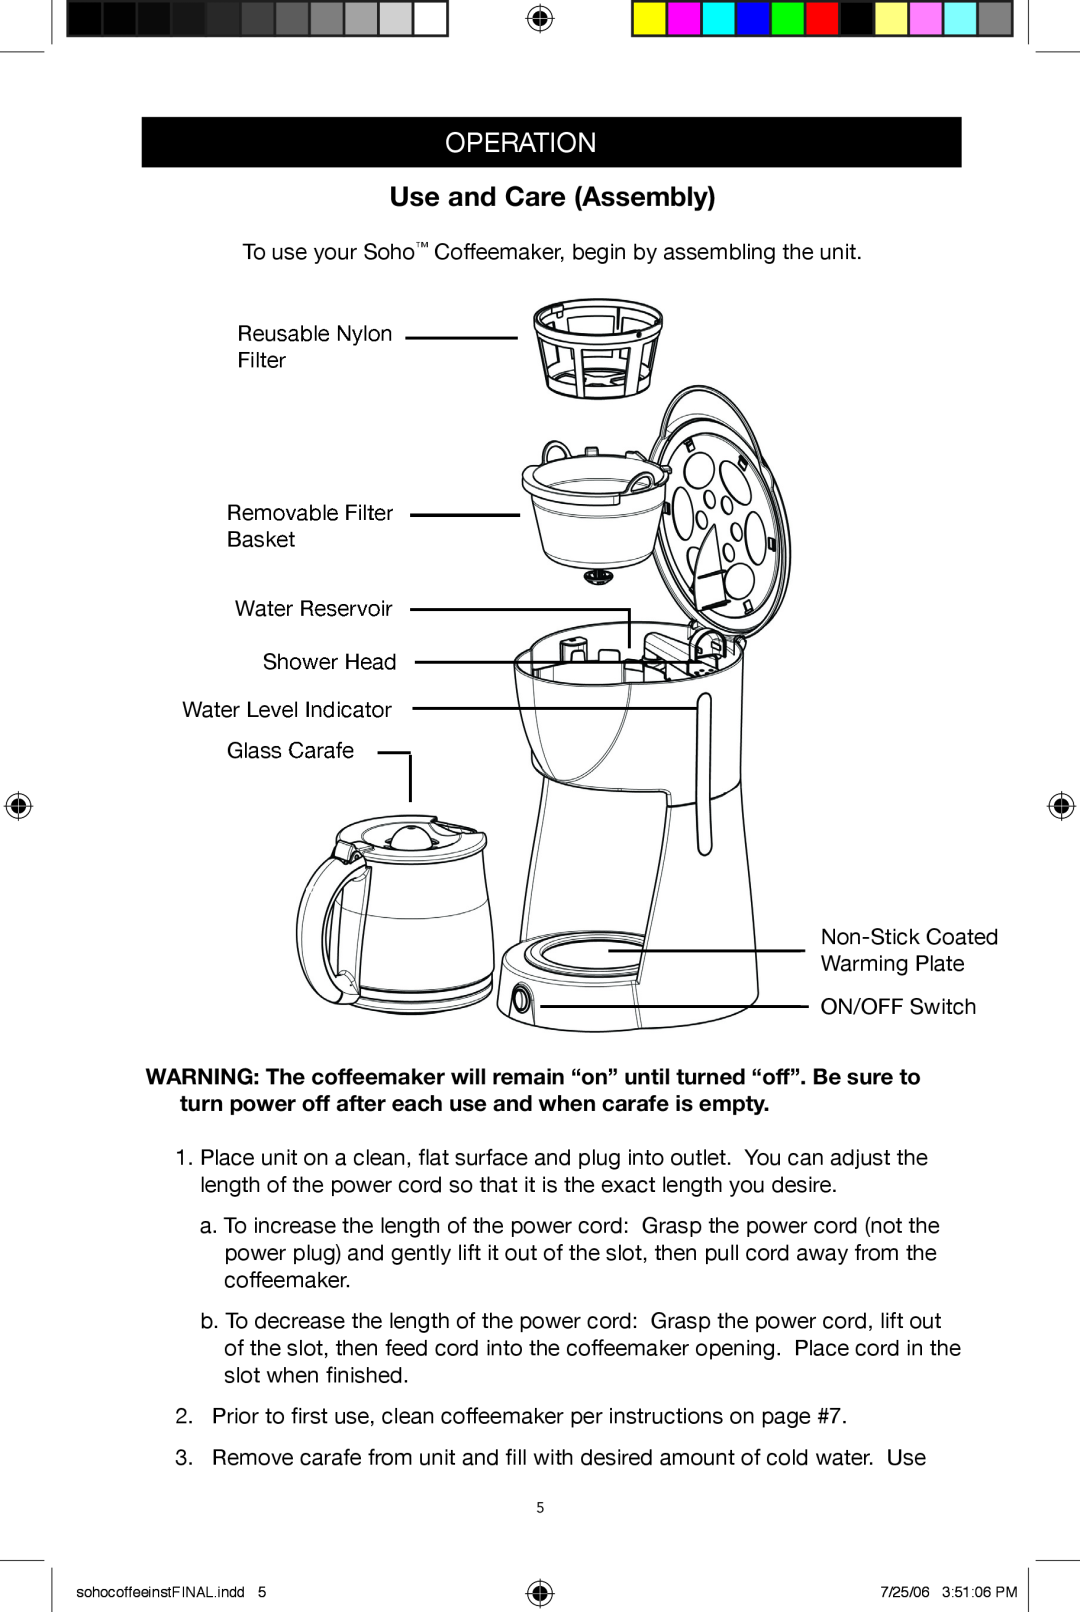 West Bend Back to Basics Coffeemaker manual Operation, Use and Care Assembly 